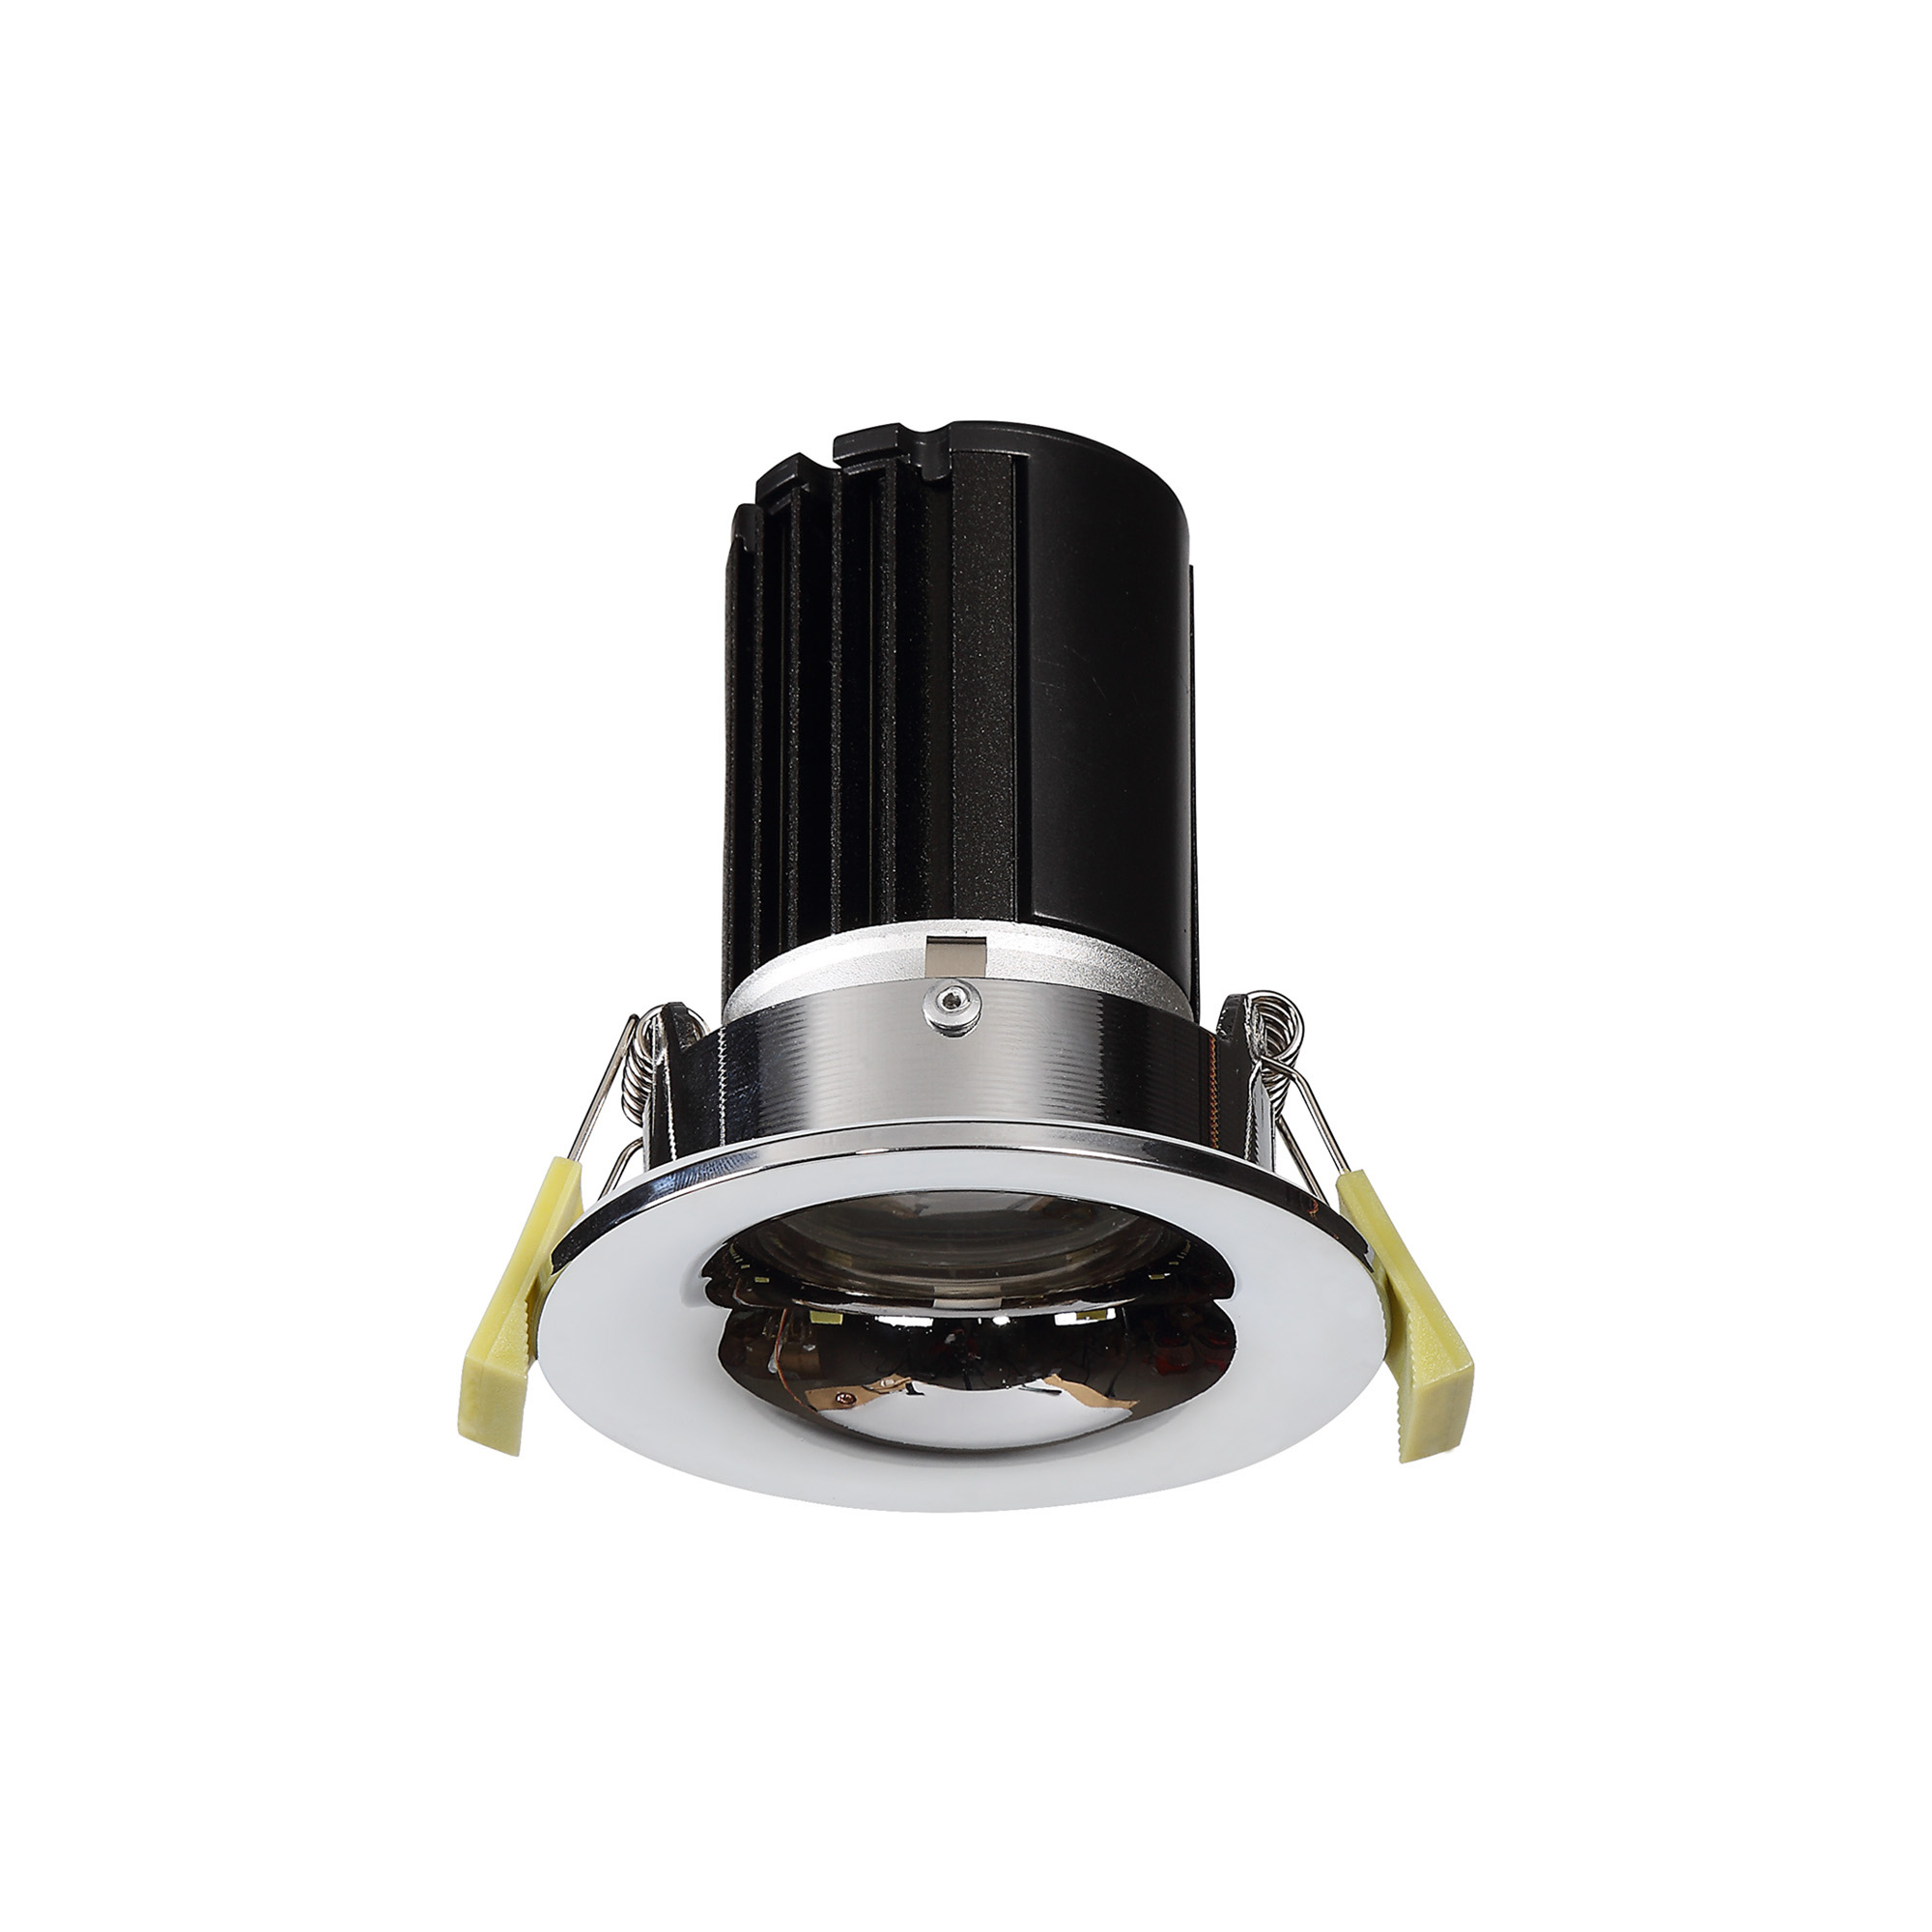 DM200772  Bruve 10 Tridonic powered 10W 2700K 750lm 12° CRI>90 LED Engine Polished Chrome Fixed Round Recessed Downlight, Inner Glass cover, IP65